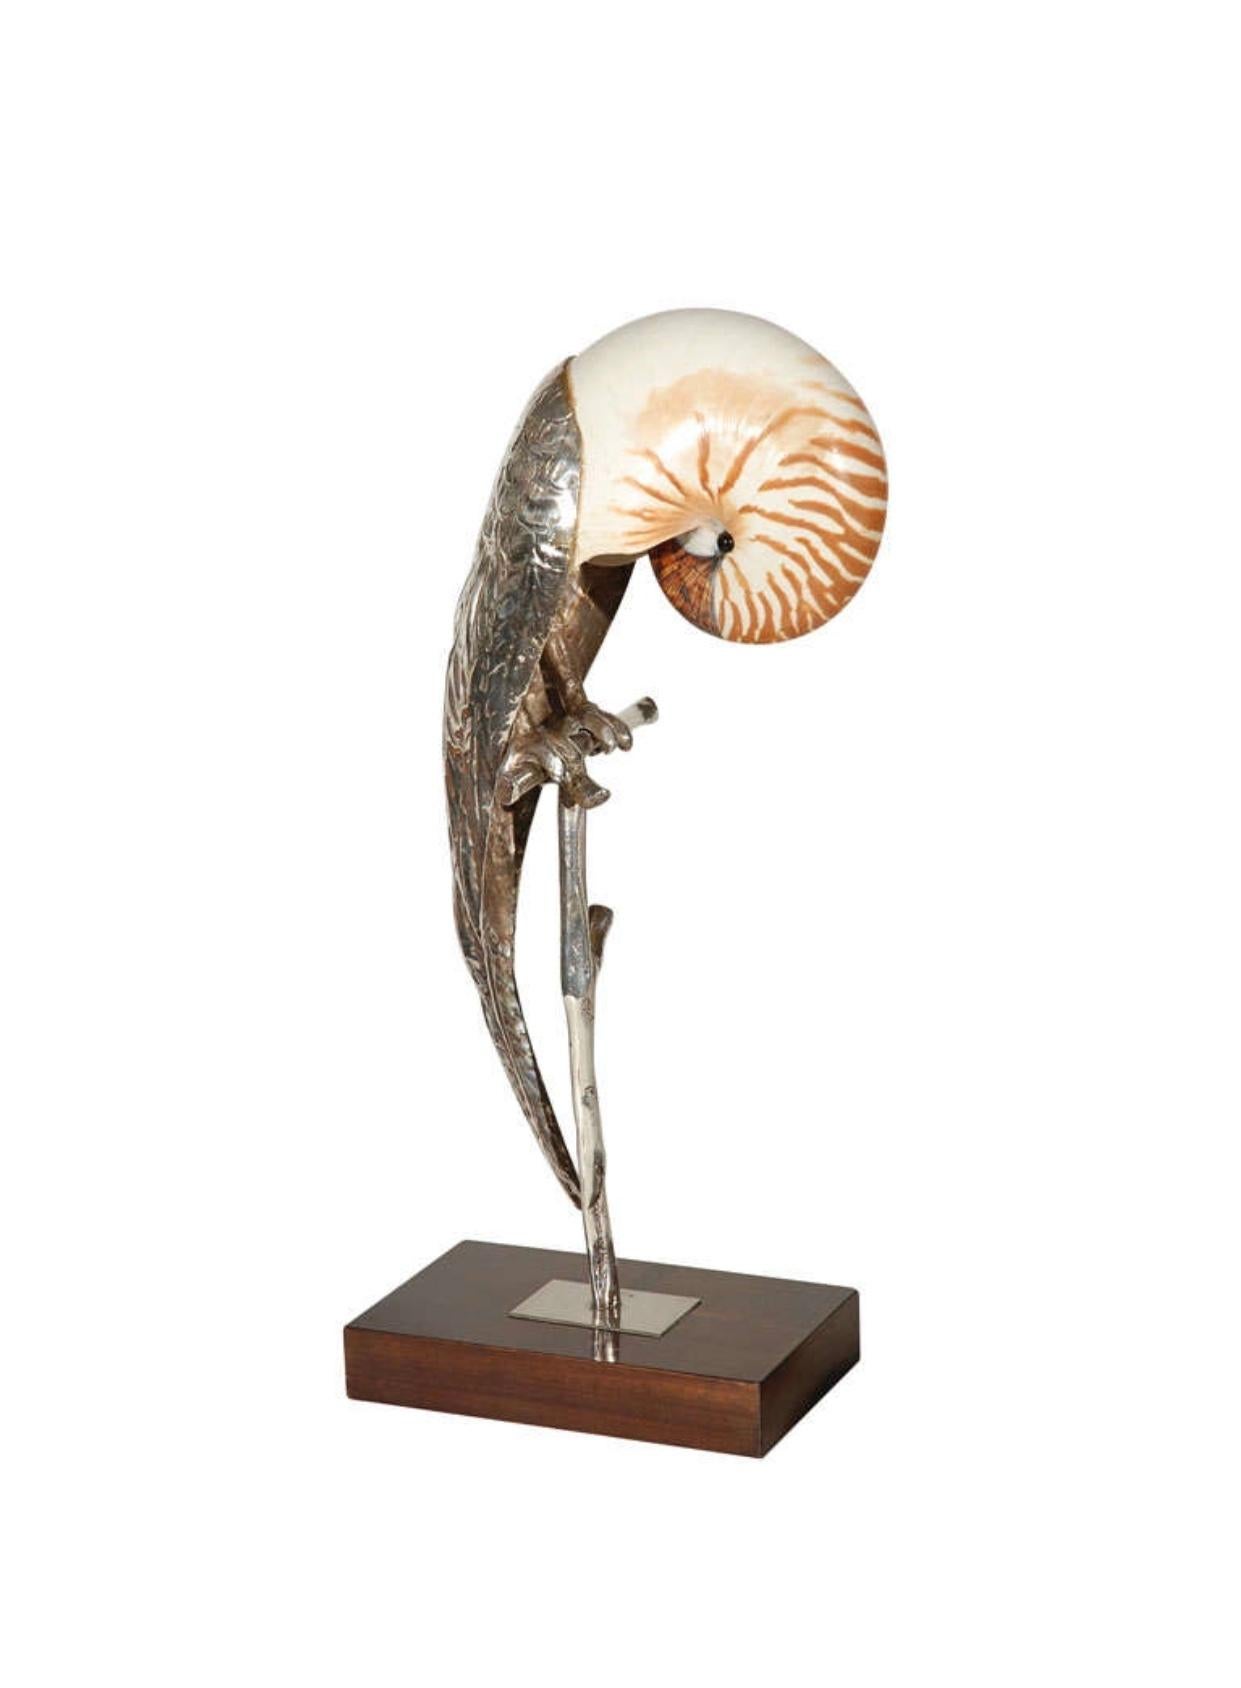 A beautiful hand crafted bird sculpture perched on a silver plated custom stand integrating a polished nautilus seashell by Gabriella Binazzi - signed. 



